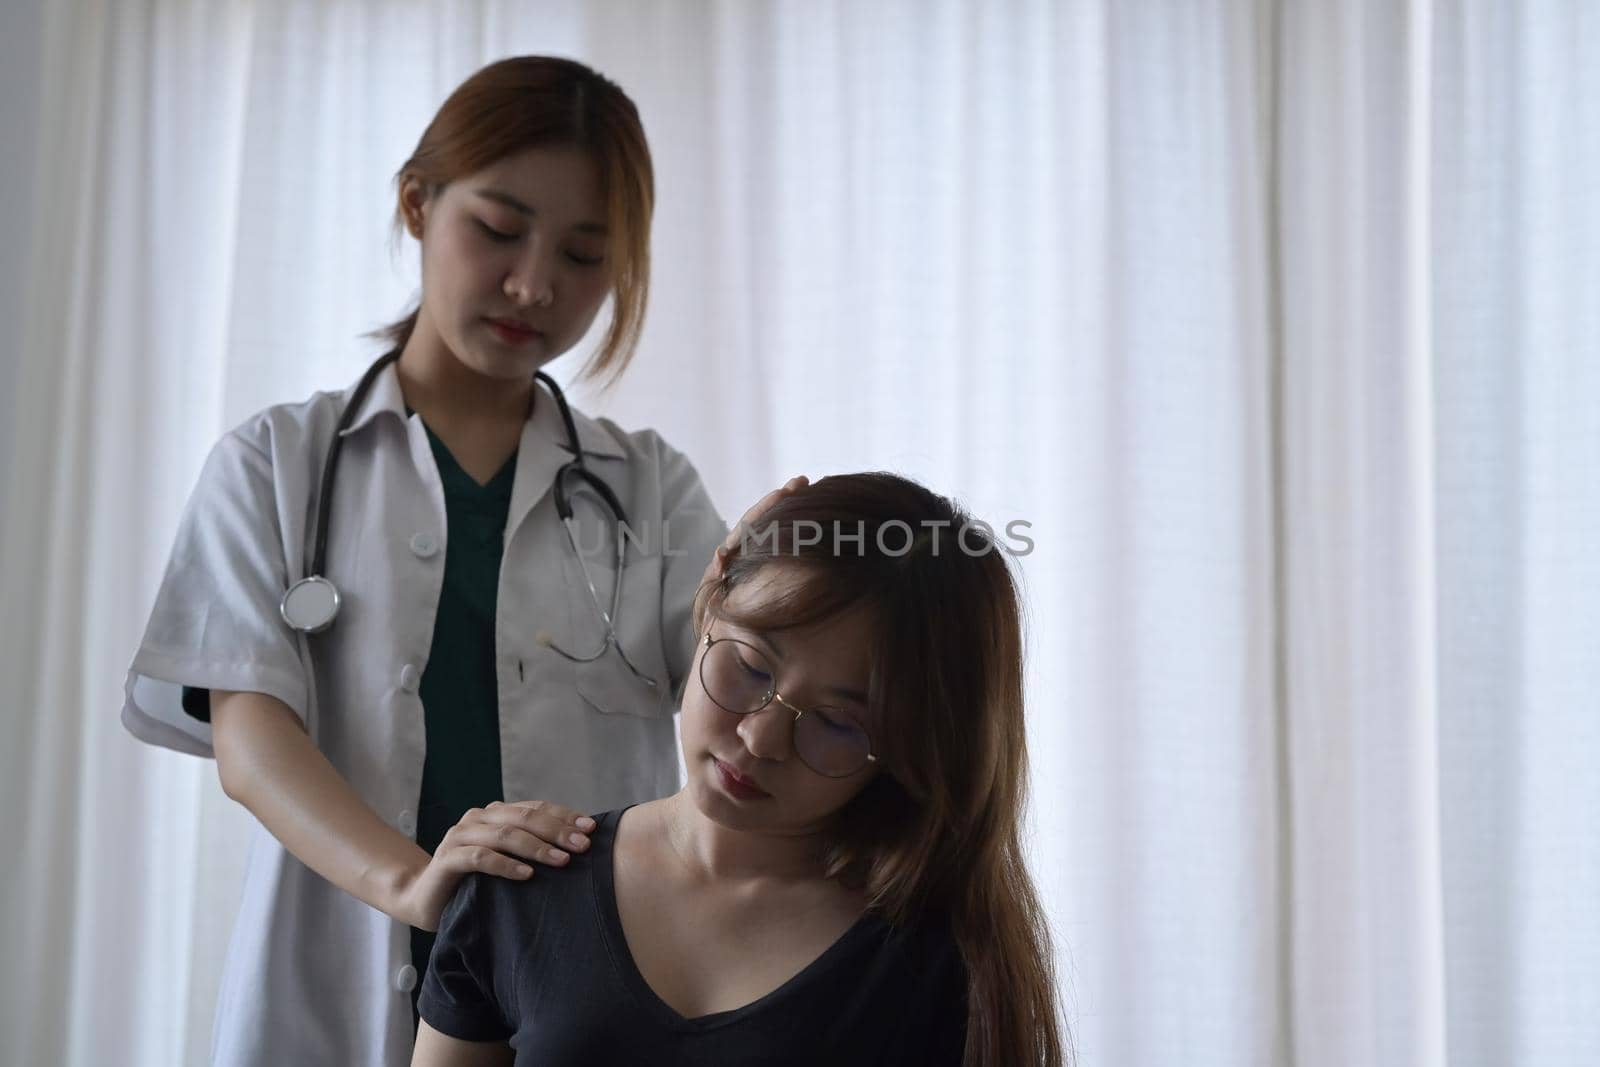 Professional physiotherapist examining female patient with neck injuries. Rehabilitation physiotherapy concept.